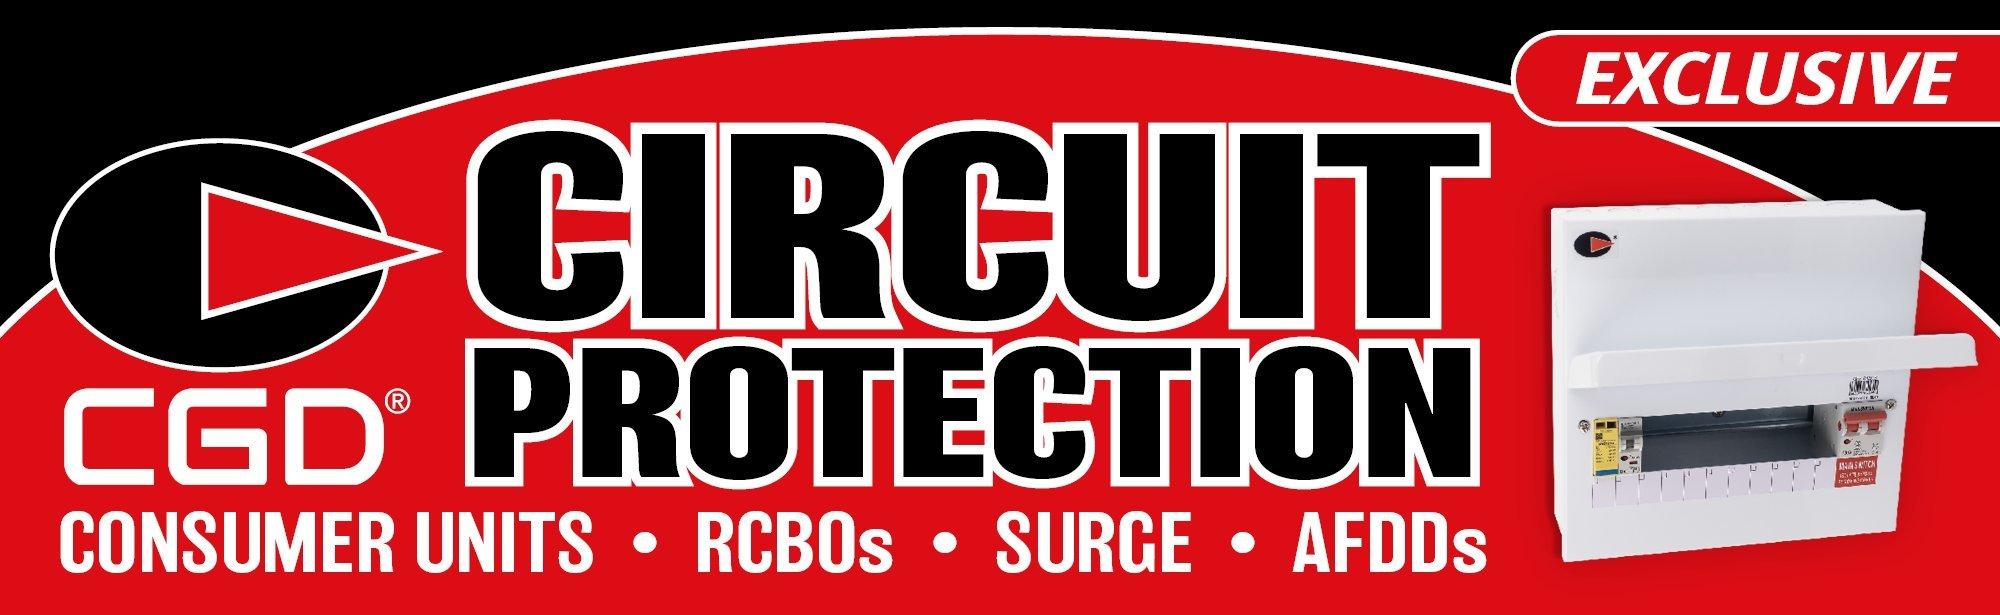 Exclusive to Denmans - NEW and improved Circuit Protection range from CGD